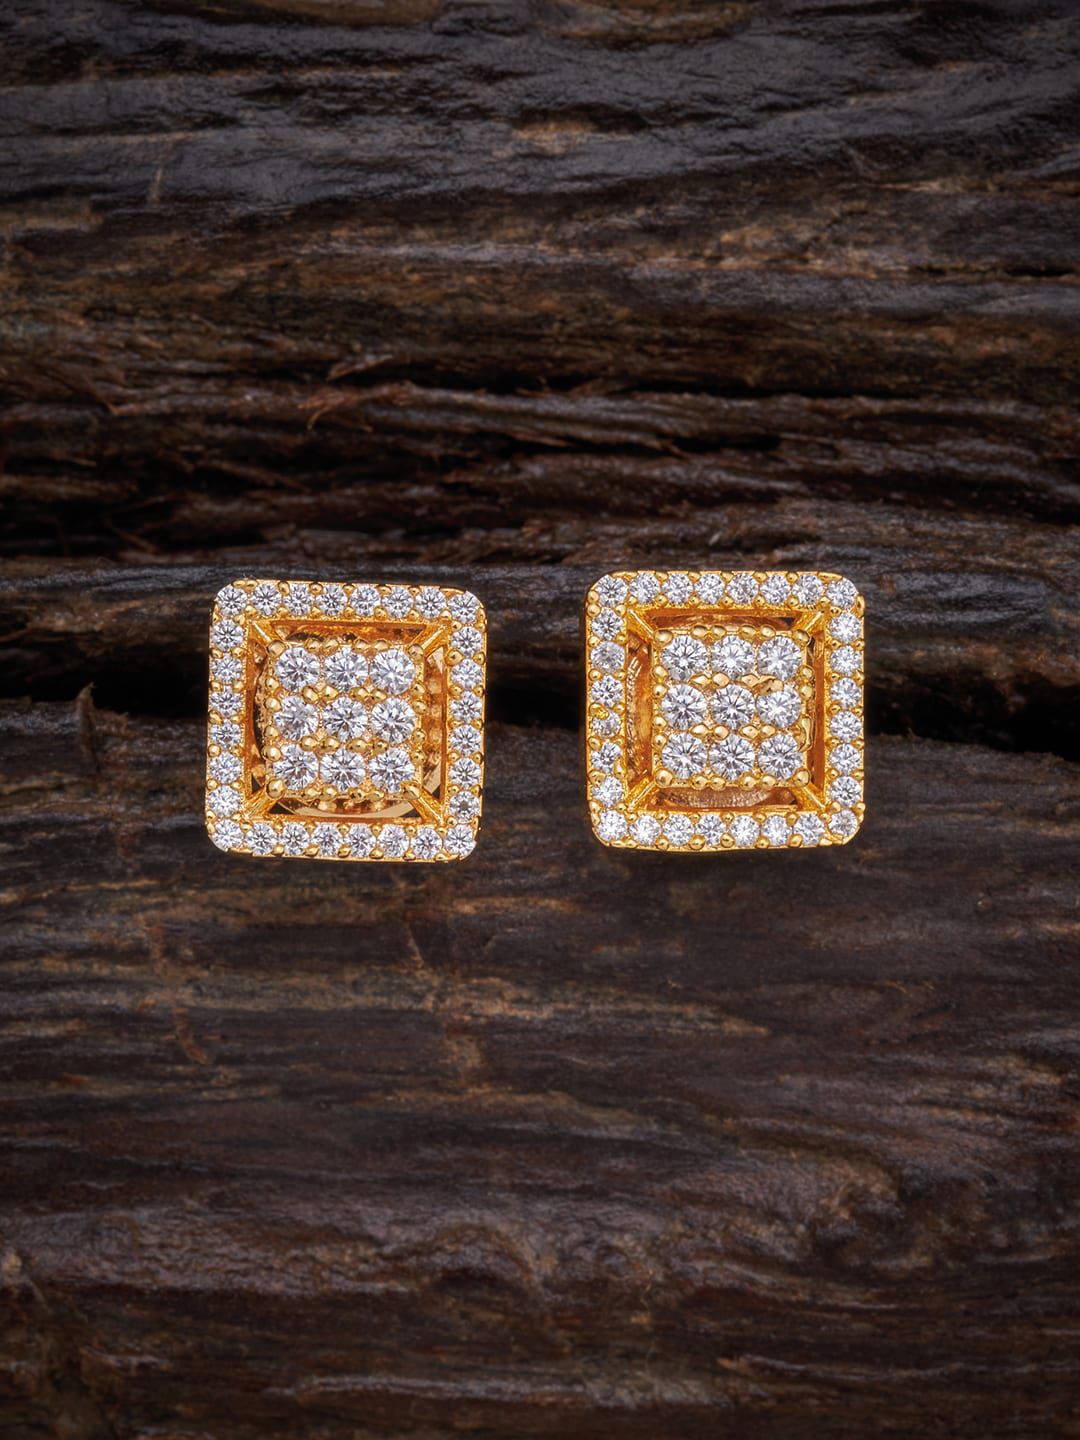 Kushal's Fashion Jewellery White Square Studs Earrings Price in India